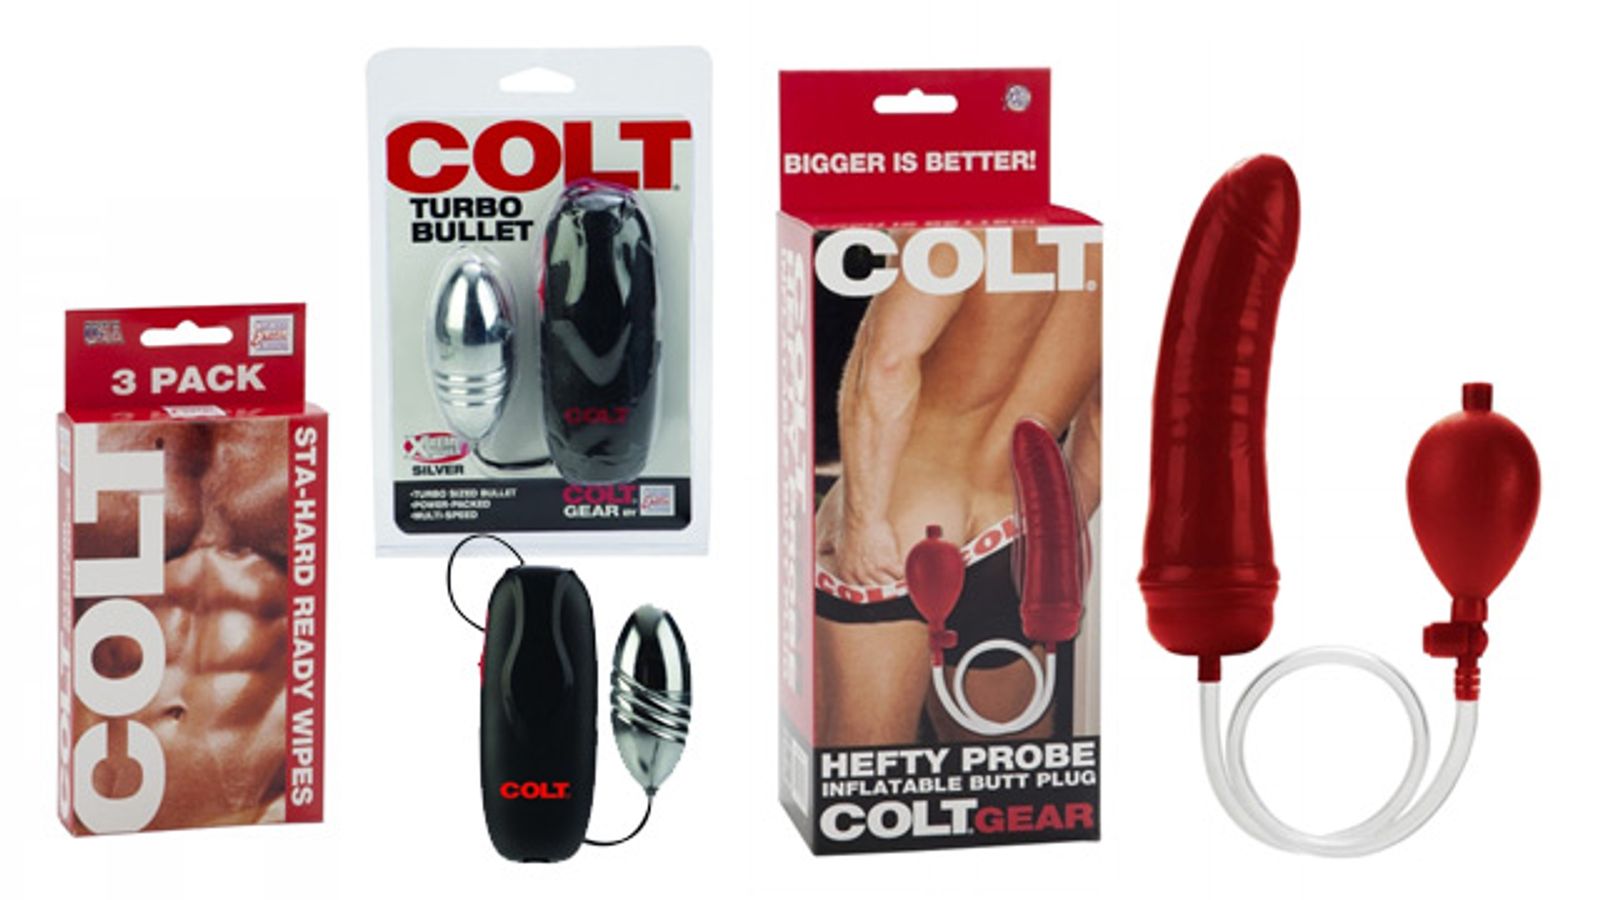 California Exotic Novelties Presents New Items in Colt Line